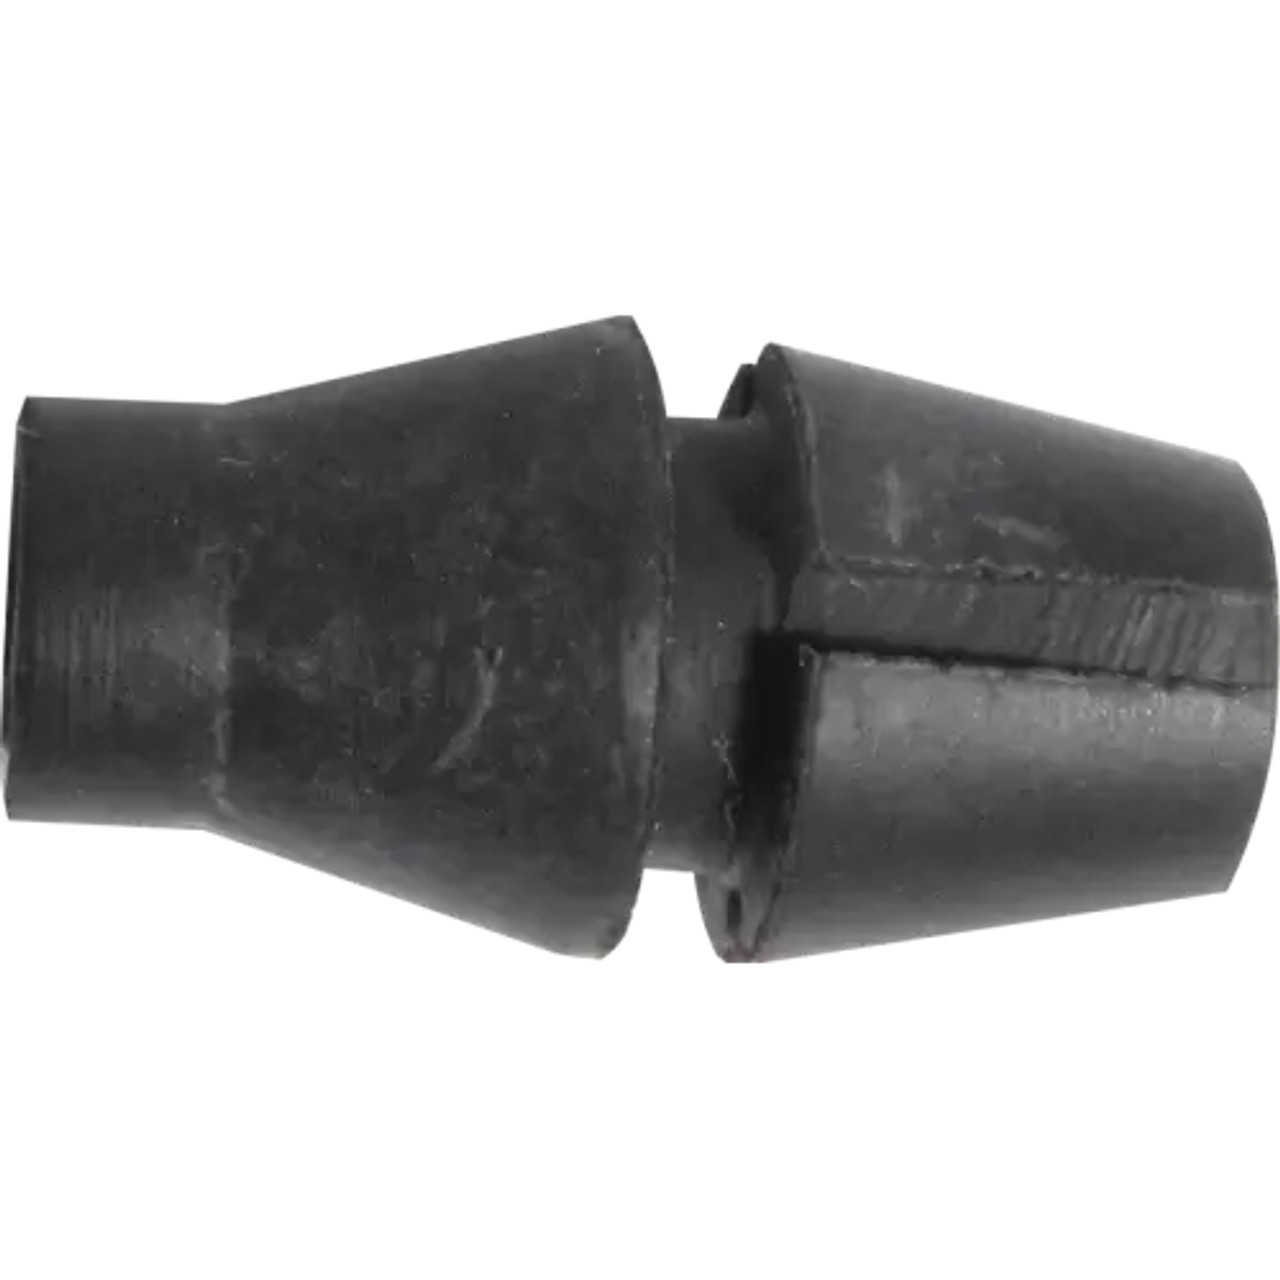 Strain Relief - Rubber, for 1/4" Diameter Hole